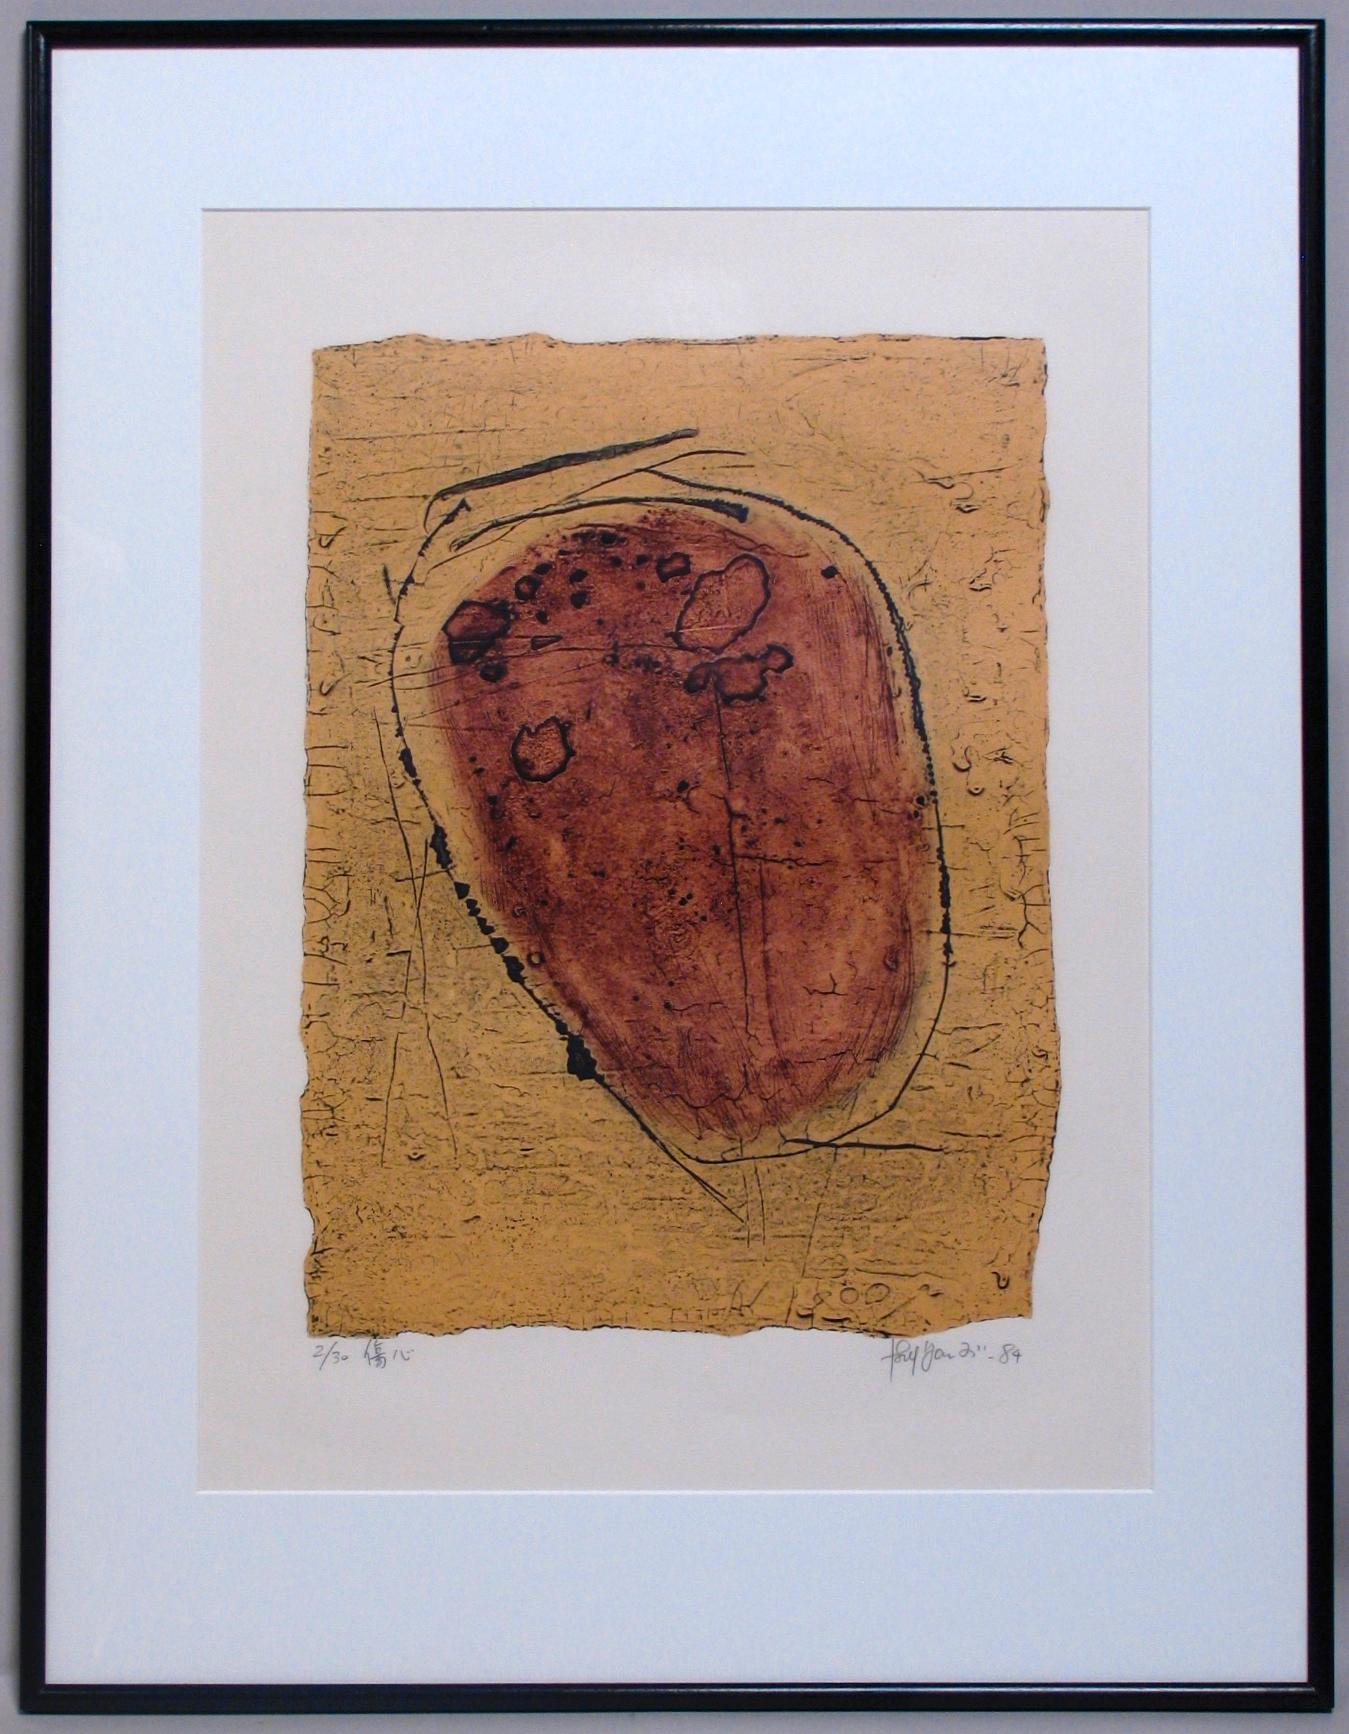 Japanese collagraph print by Tsuguo Yanai (b. 1953, Hagi, Yamaguchi), titled “Broken Heart” in Japanese with the printing number 2/30 under the image on the left and pencil signature “’84” to the right. Exhibited and purchased at the 30th CWAJ Print